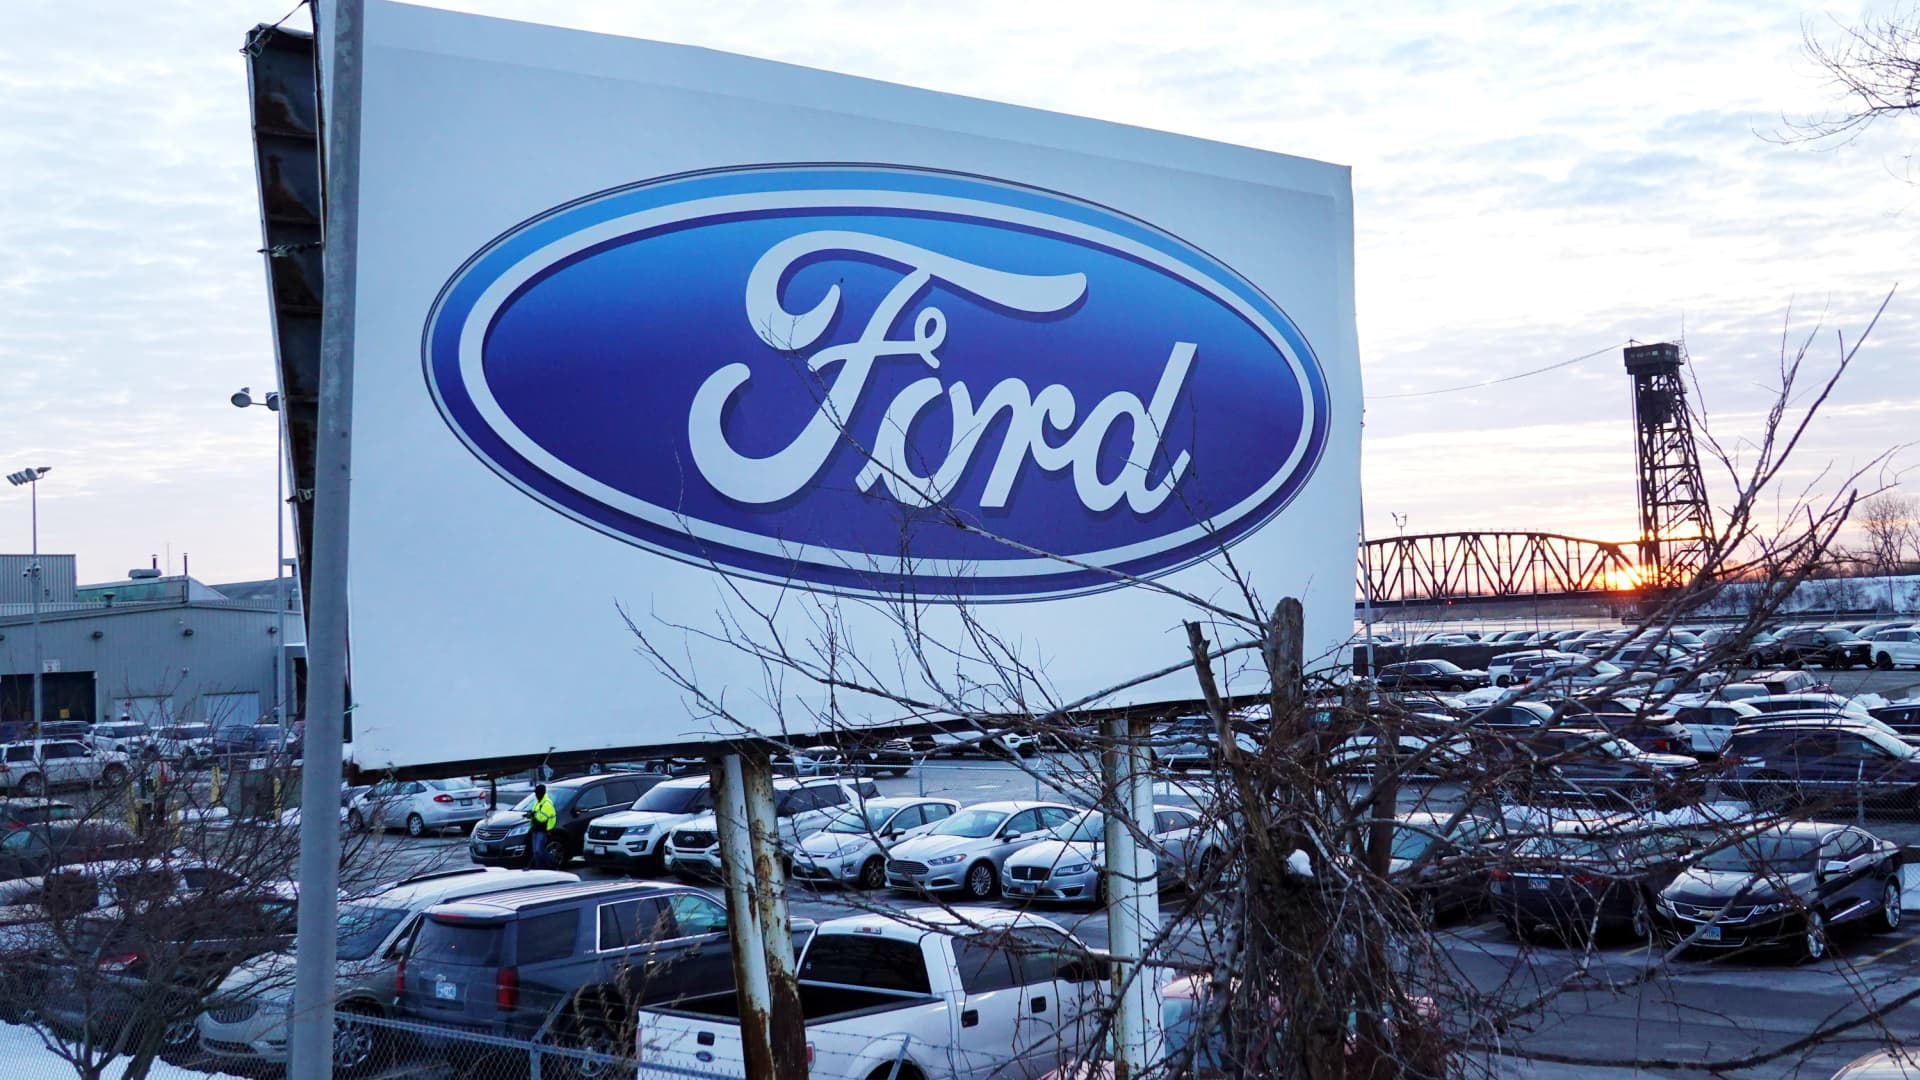 Ford is recalling SUVs due to the risk of engine fire and says they must be parked outdoors